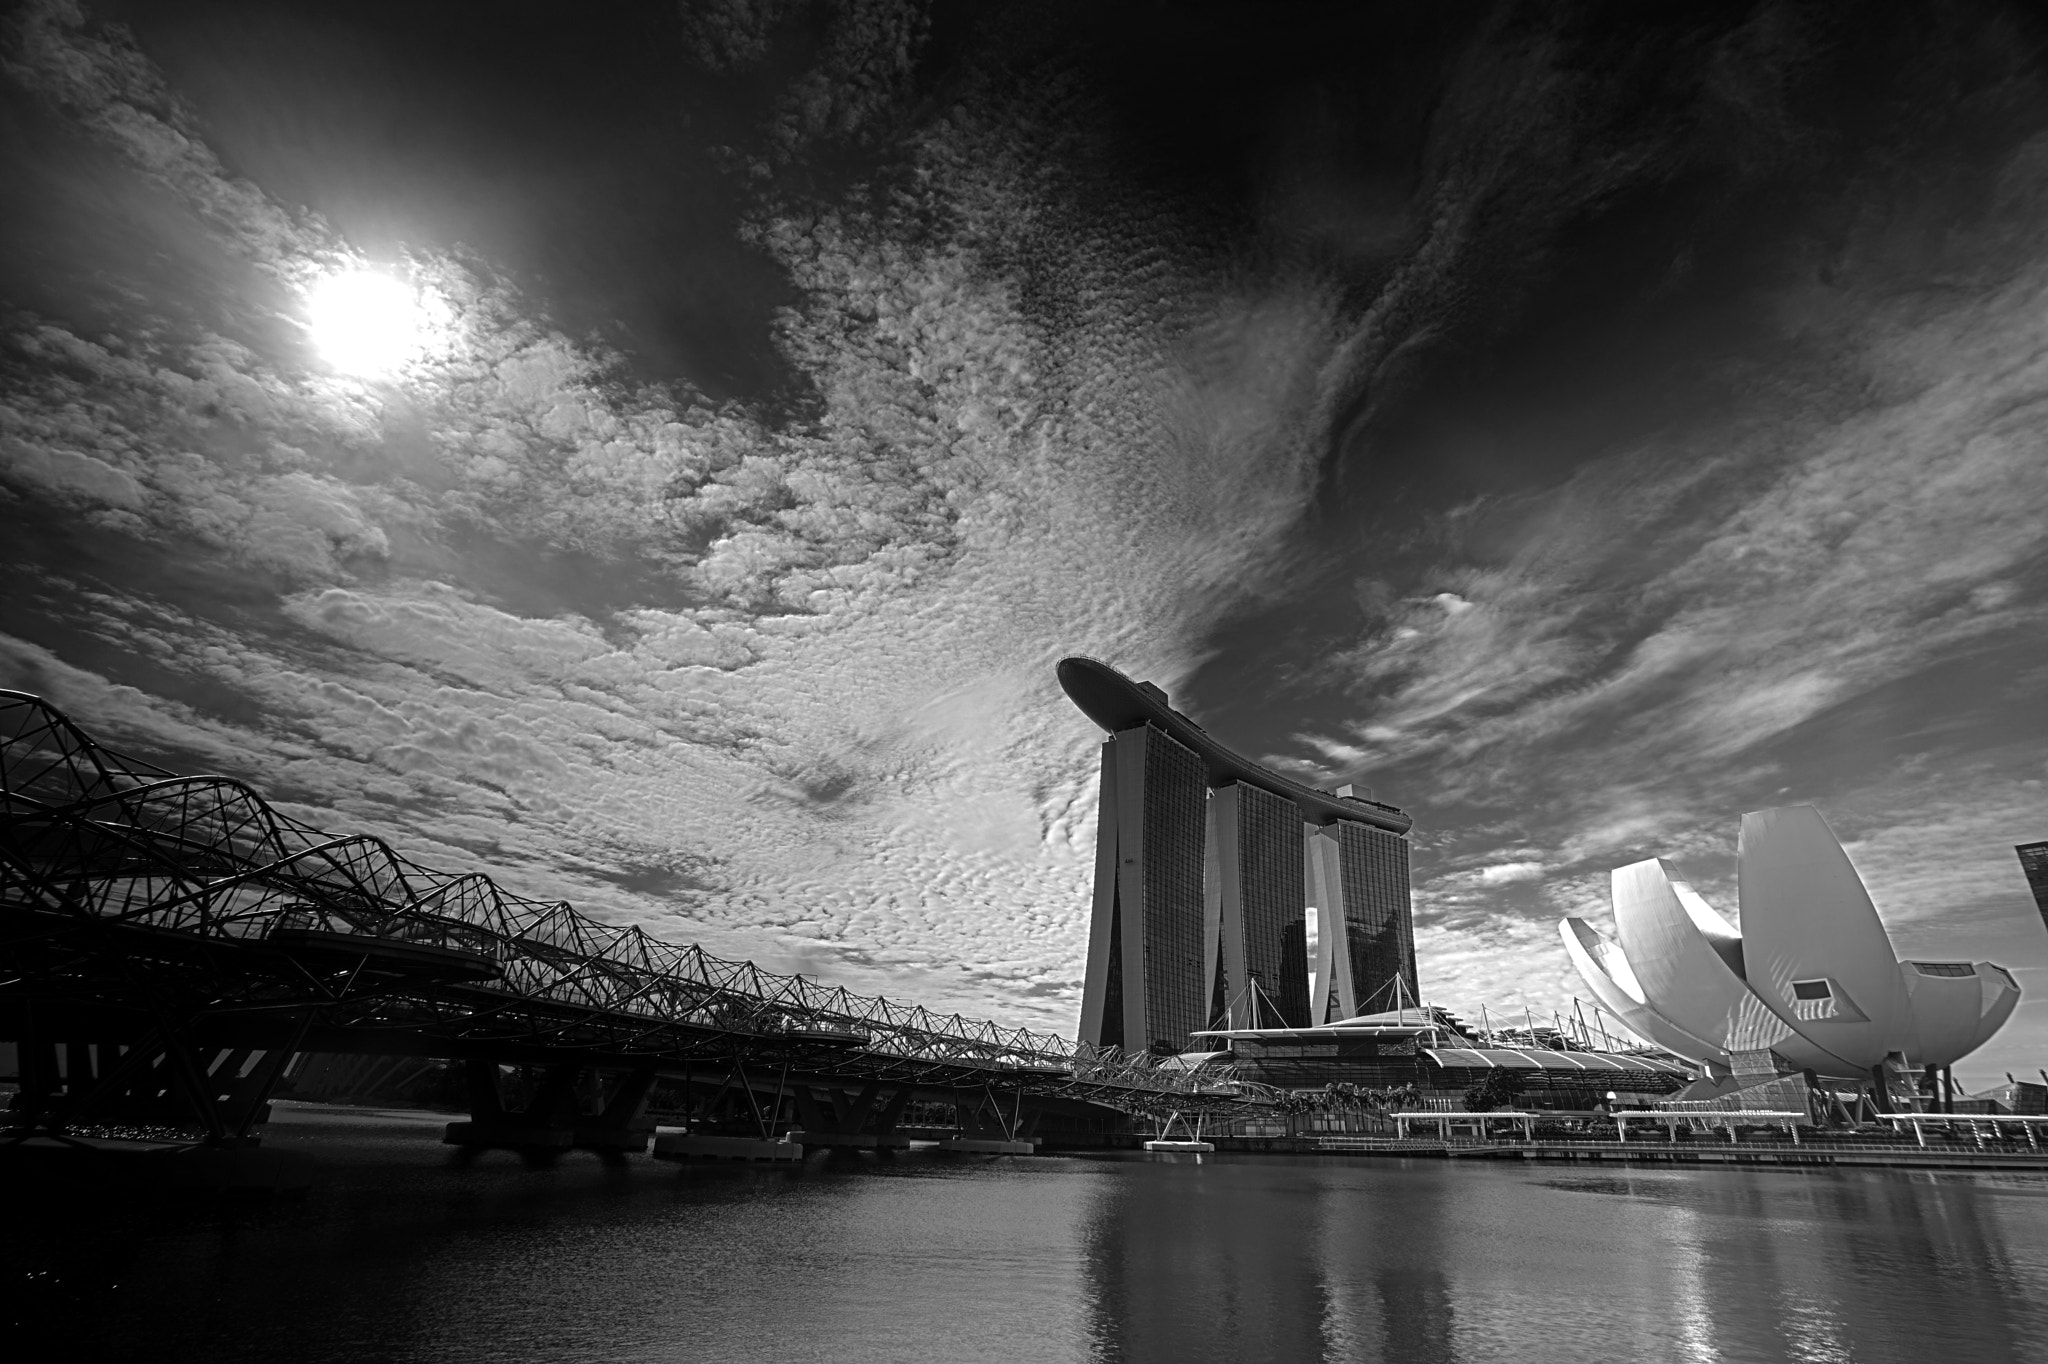 Sony a7 sample photo. Singapore mbs with b&w hdr photography